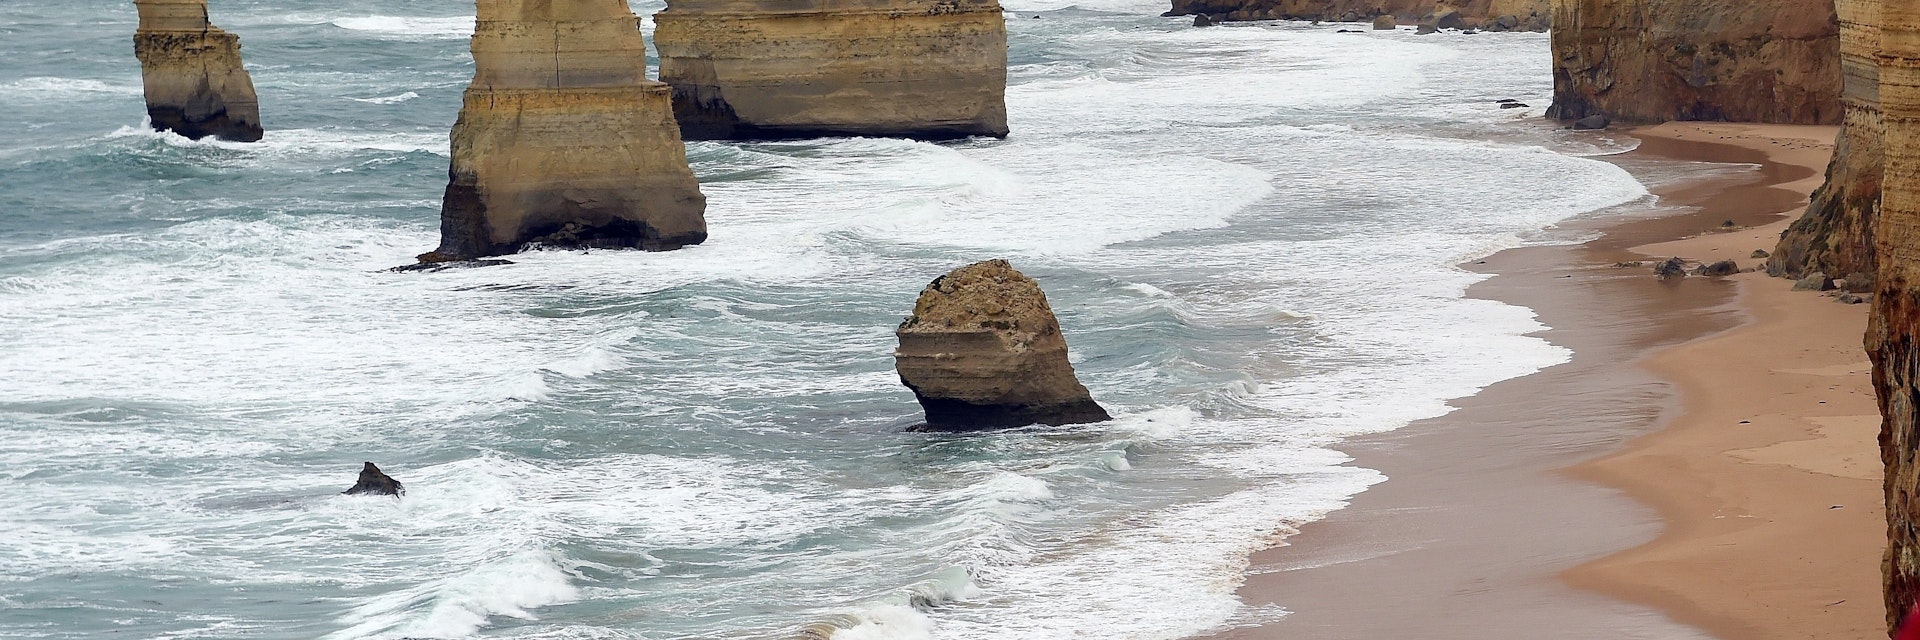 In this photo taken on March 24, 2015, waves crash into the base of natural limestone structures known as the Twelve Apostles off the shore of the Port Campbell National Park, by the Great Ocean road in Victoria. The close proximity of the collection of limestone stacks to one another has made the site a popular tourist attraction.  AFP PHOTO / INDRANIL MUKHERJEE        (Photo credit should read INDRANIL MUKHERJEE/AFP/Getty Images)